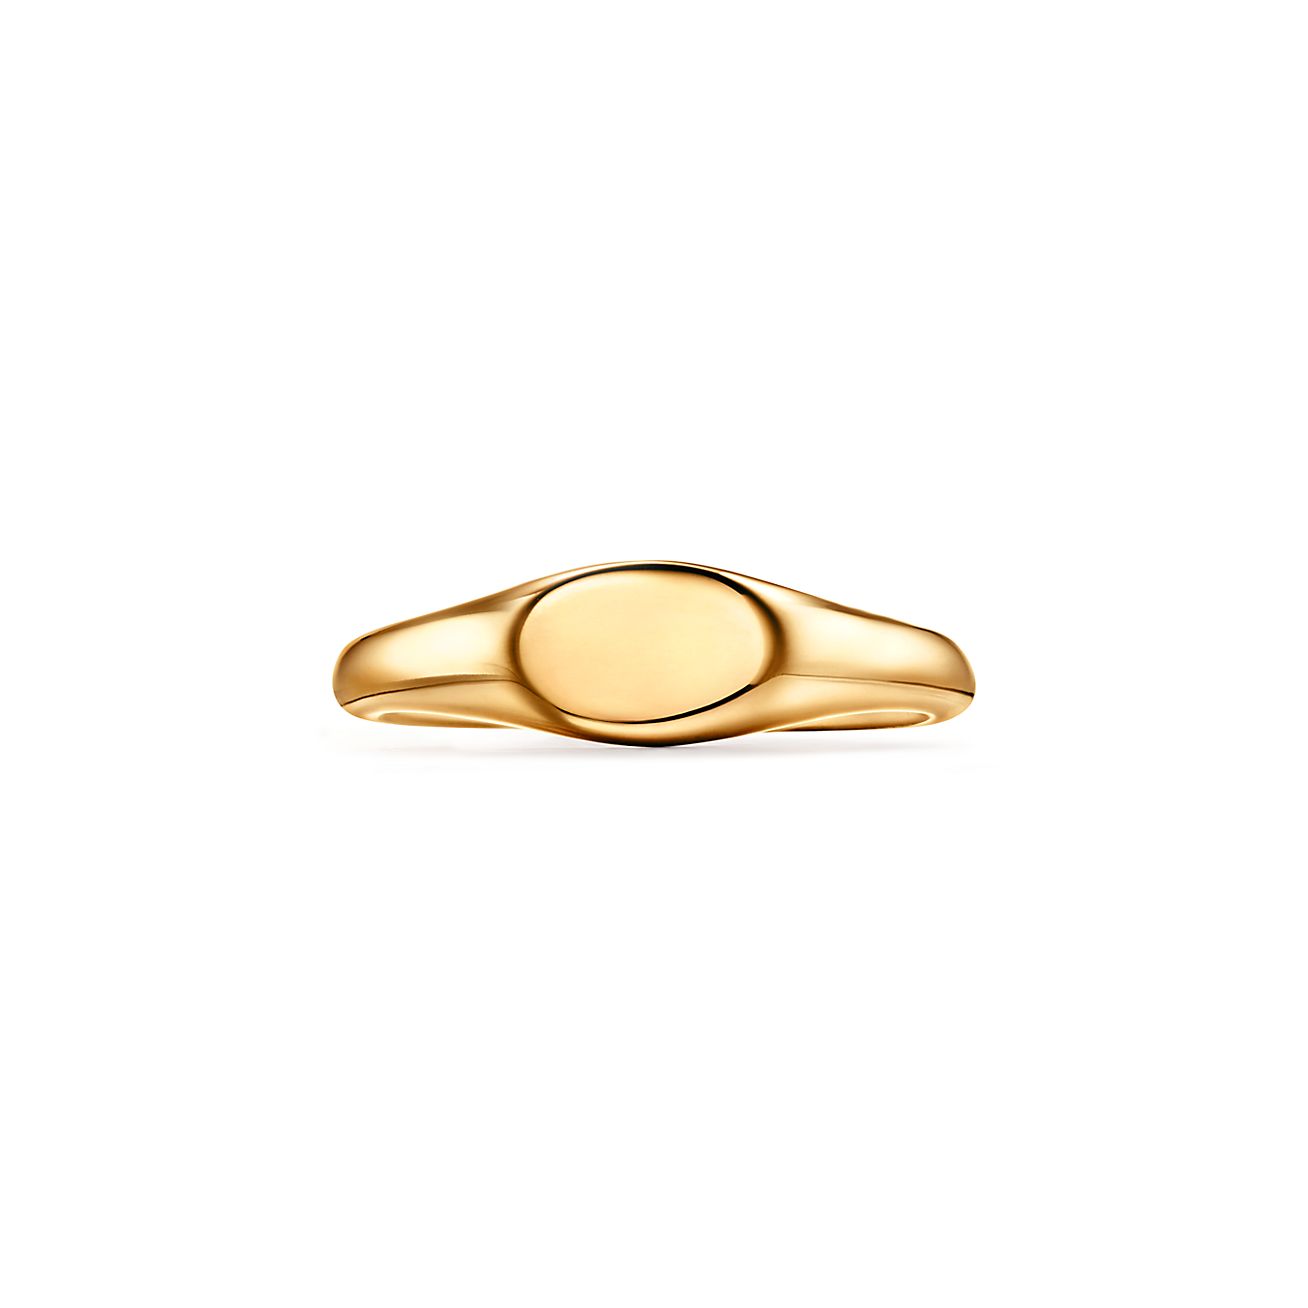 micro oval signet ring in 18k gold 